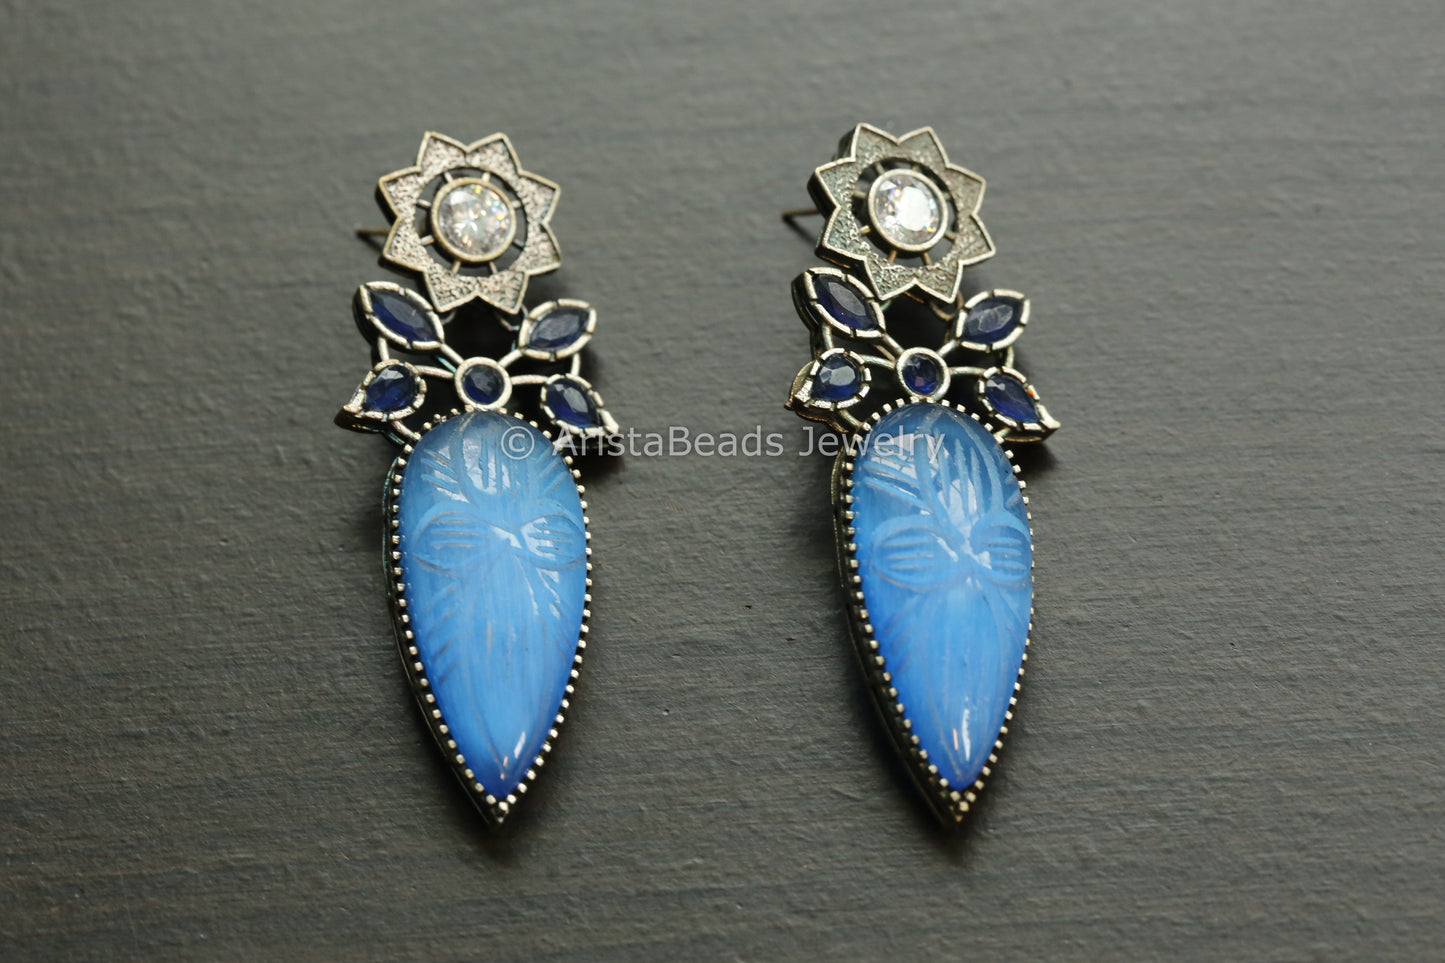 Large Oxidized Carved Stone Earrings - Blue